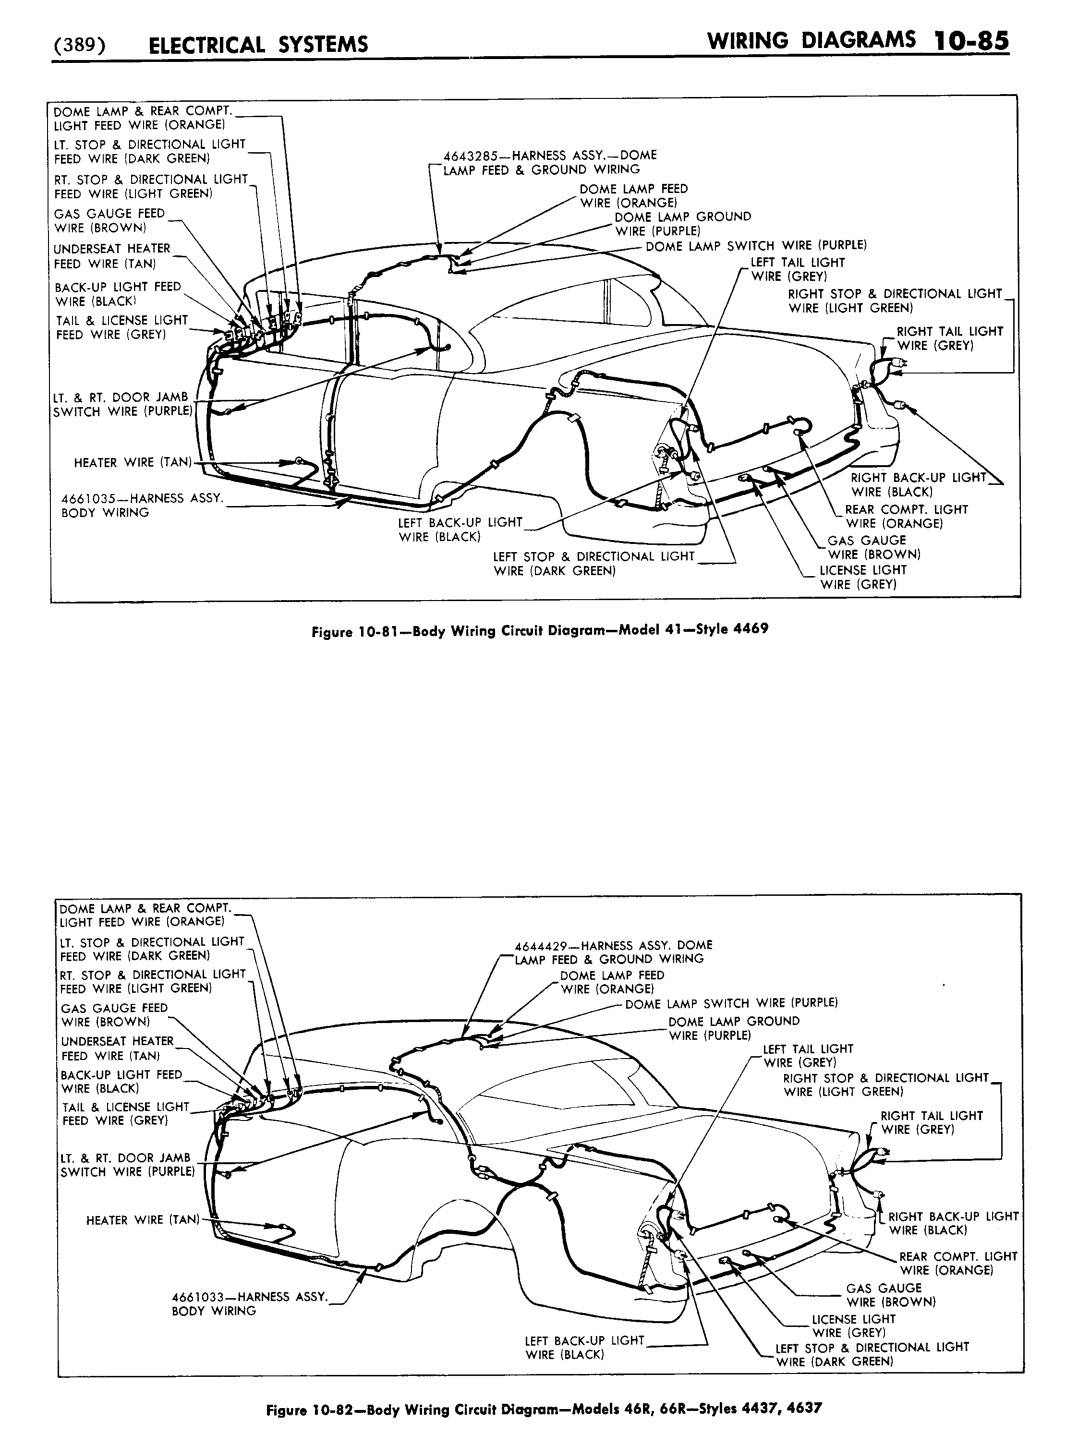 n_11 1955 Buick Shop Manual - Electrical Systems-085-085.jpg